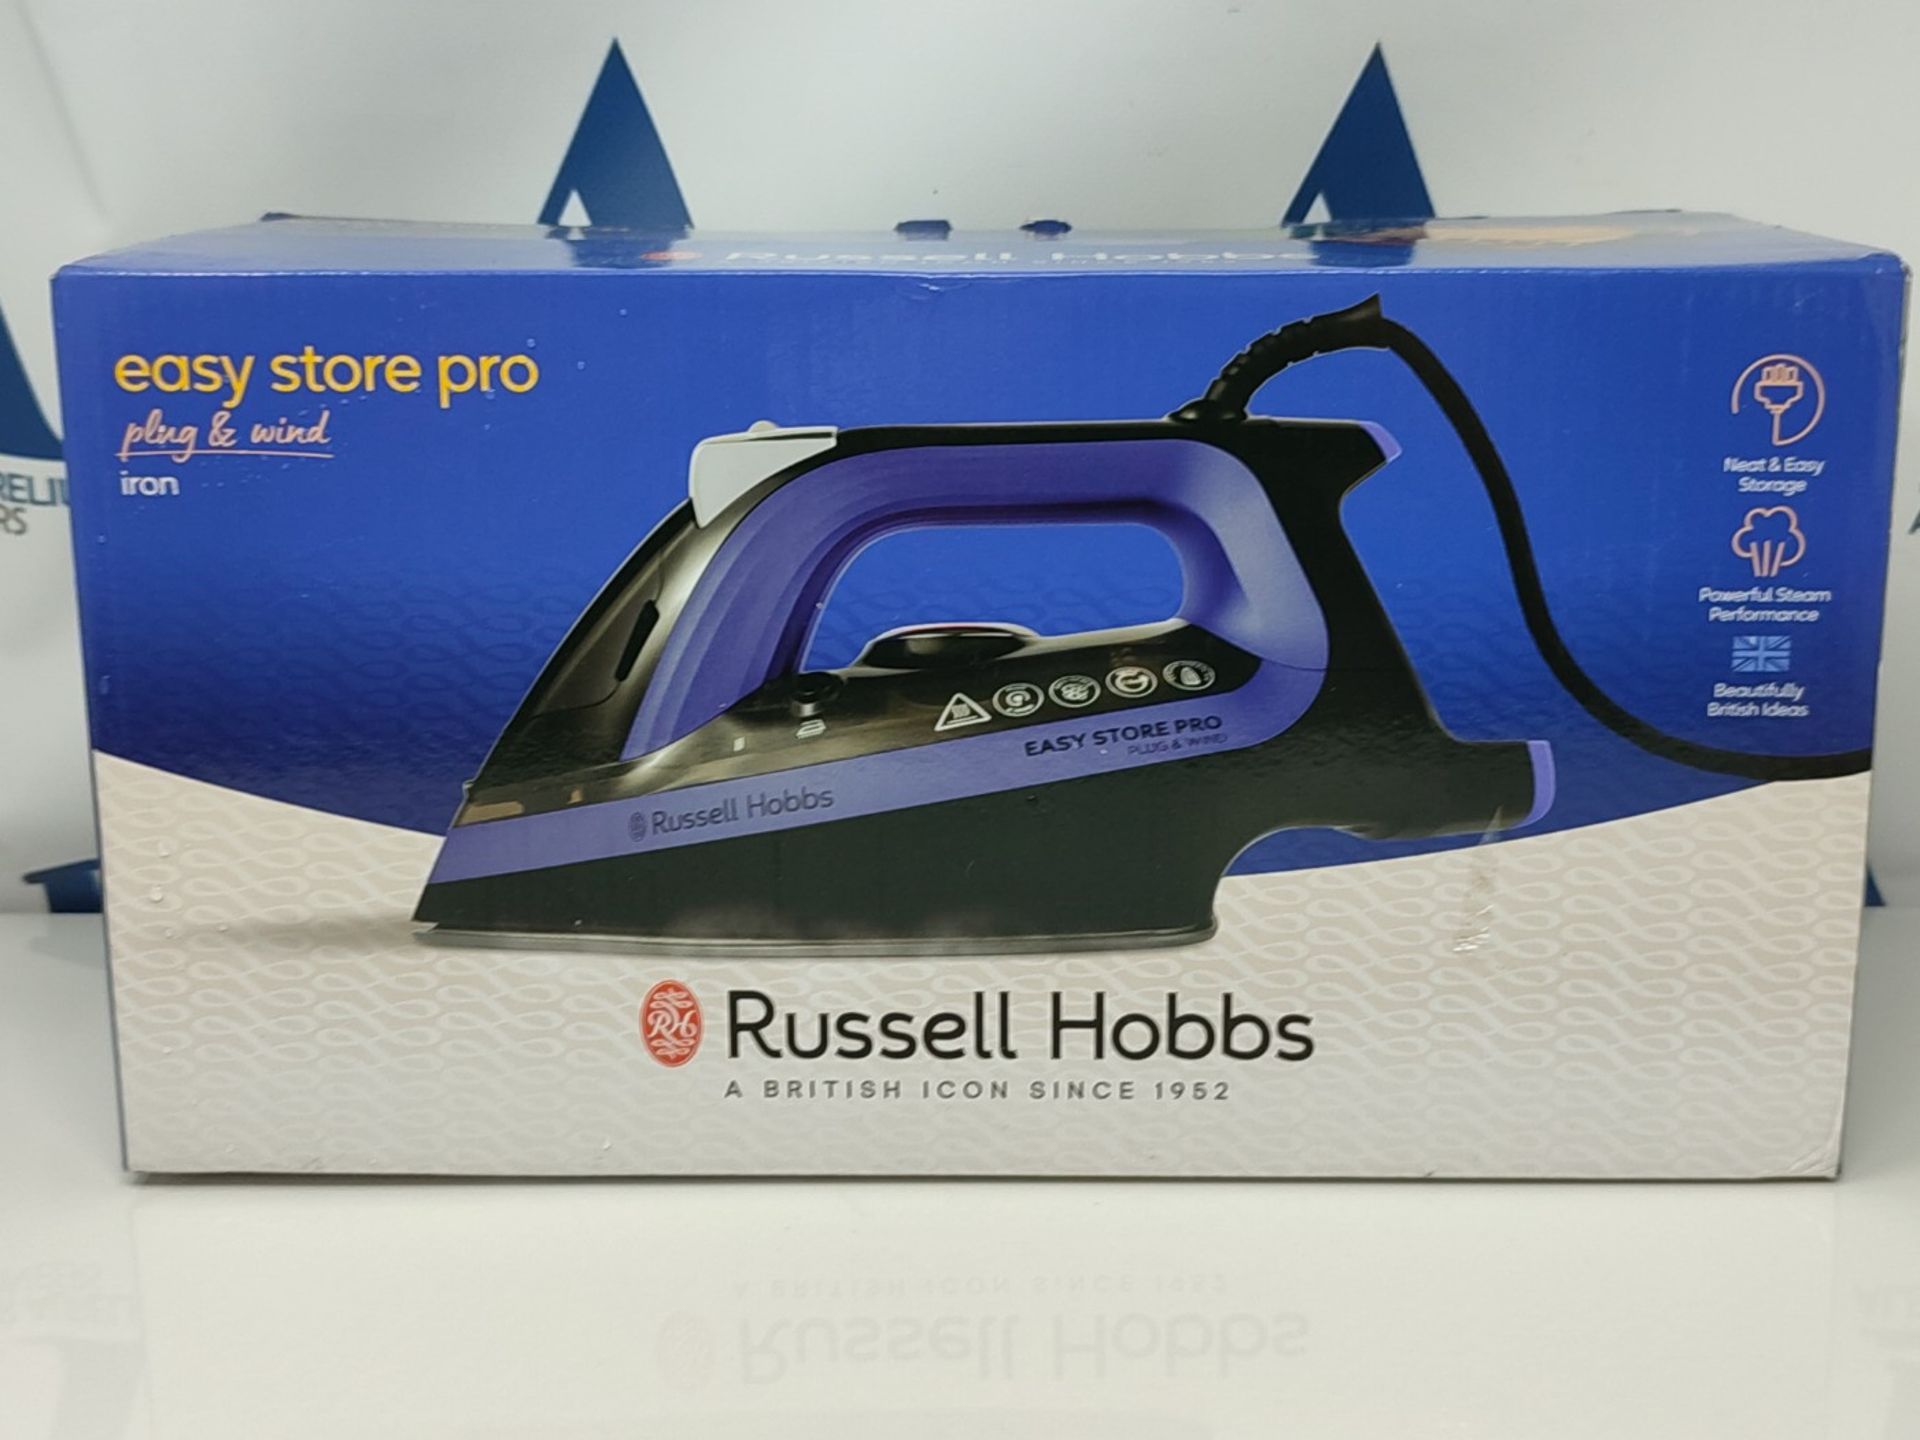 Russell Hobbs 26731 Plug & Wrap Steam Iron - One Temperature Safe on All Fabrics, Easy